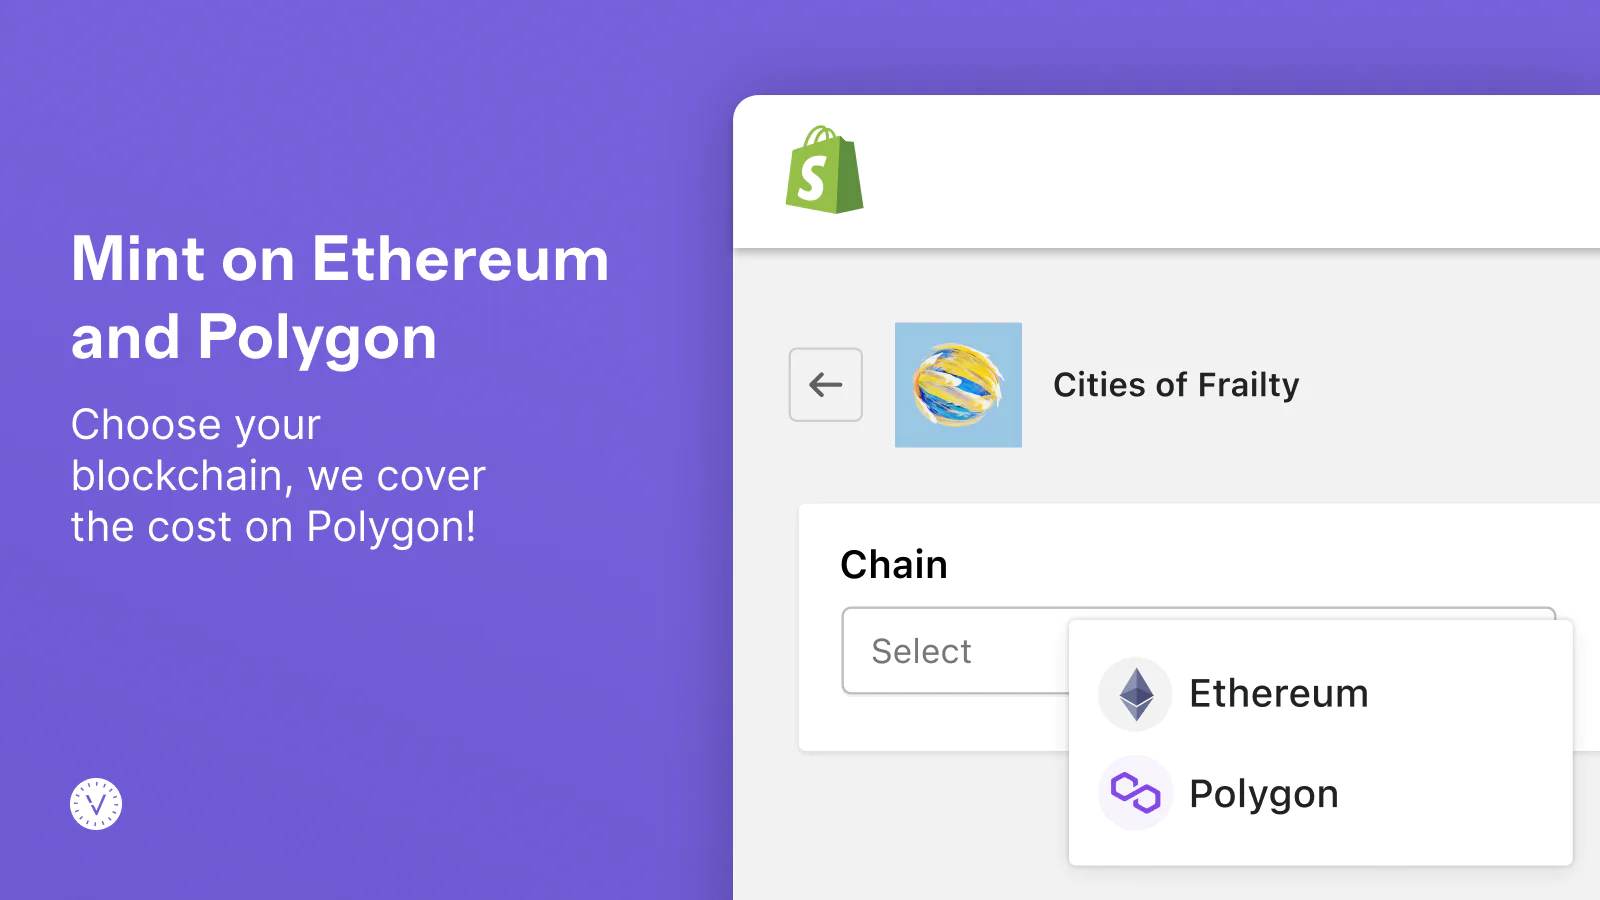 The image shows that you can choose your blockchain